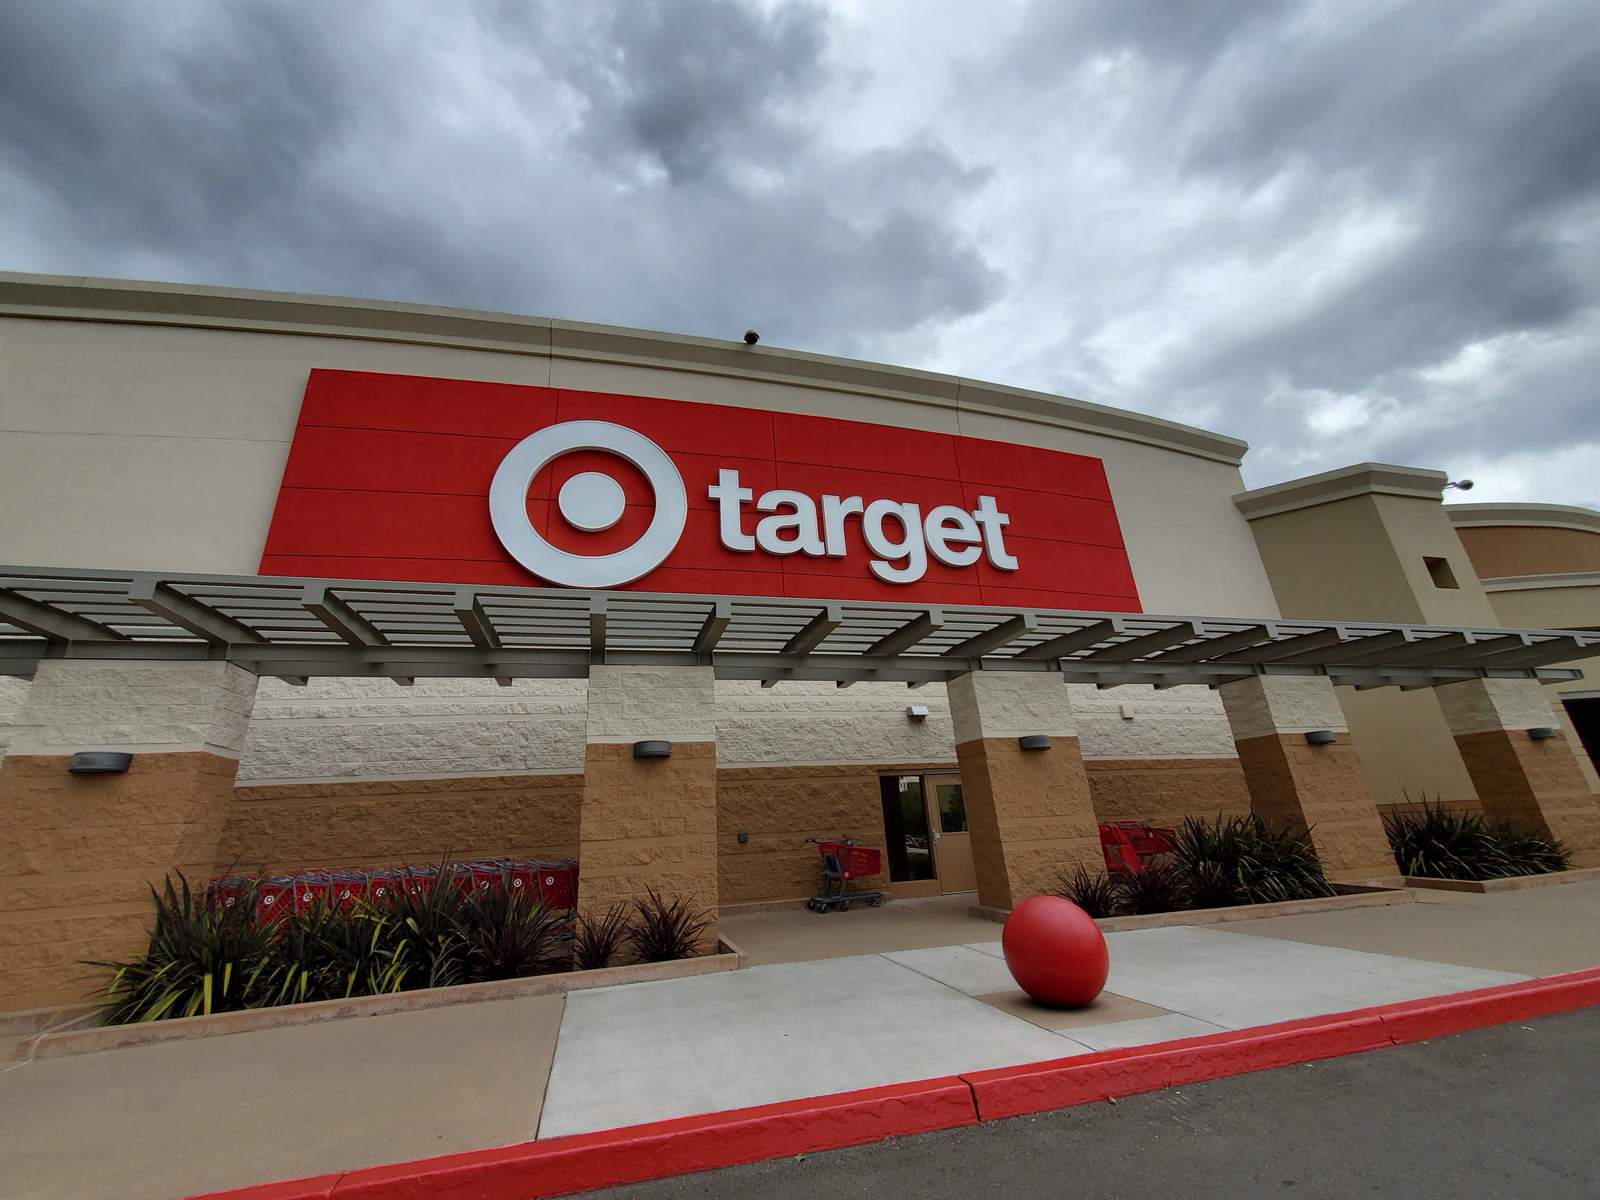 Target giving $500 bonuses to its employees for working during COVID-19 pandemic